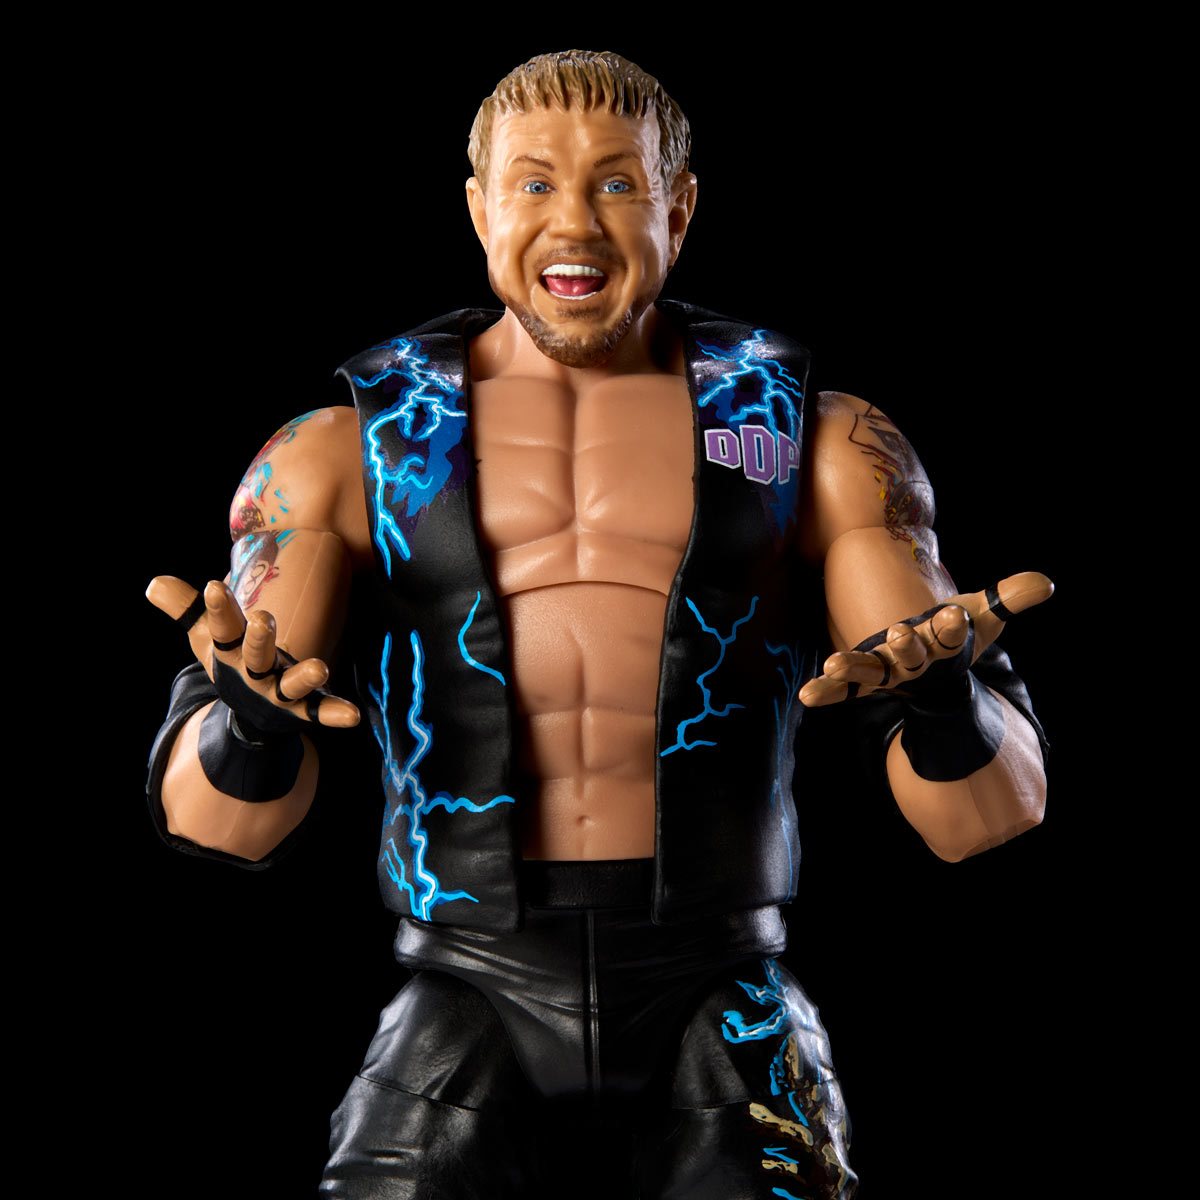 WWE Elite Collection Greatest Hits Diamond Dallas Page